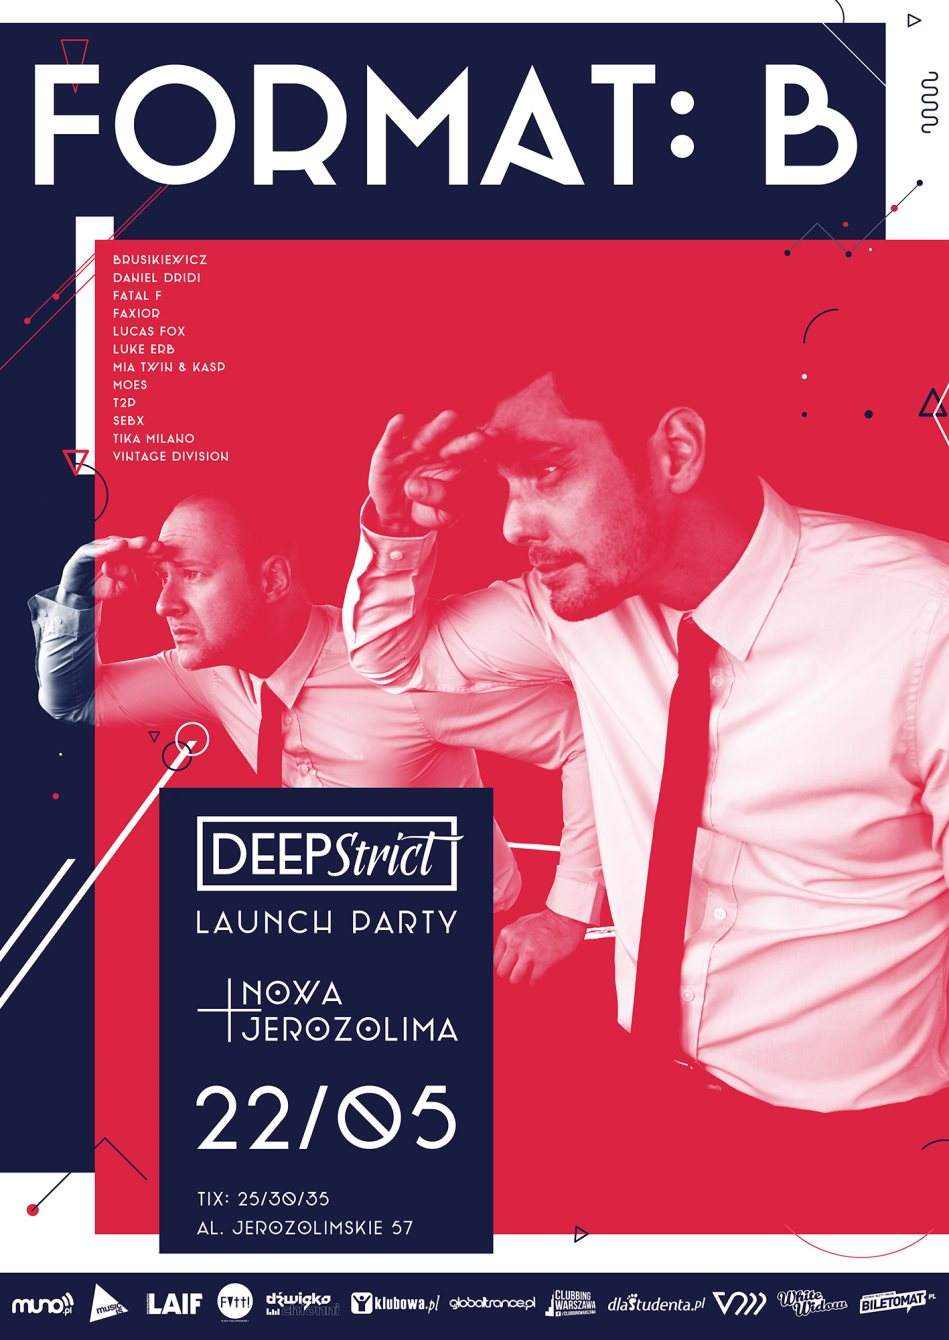 Deepstrict Launch Party with Format: B - Página frontal